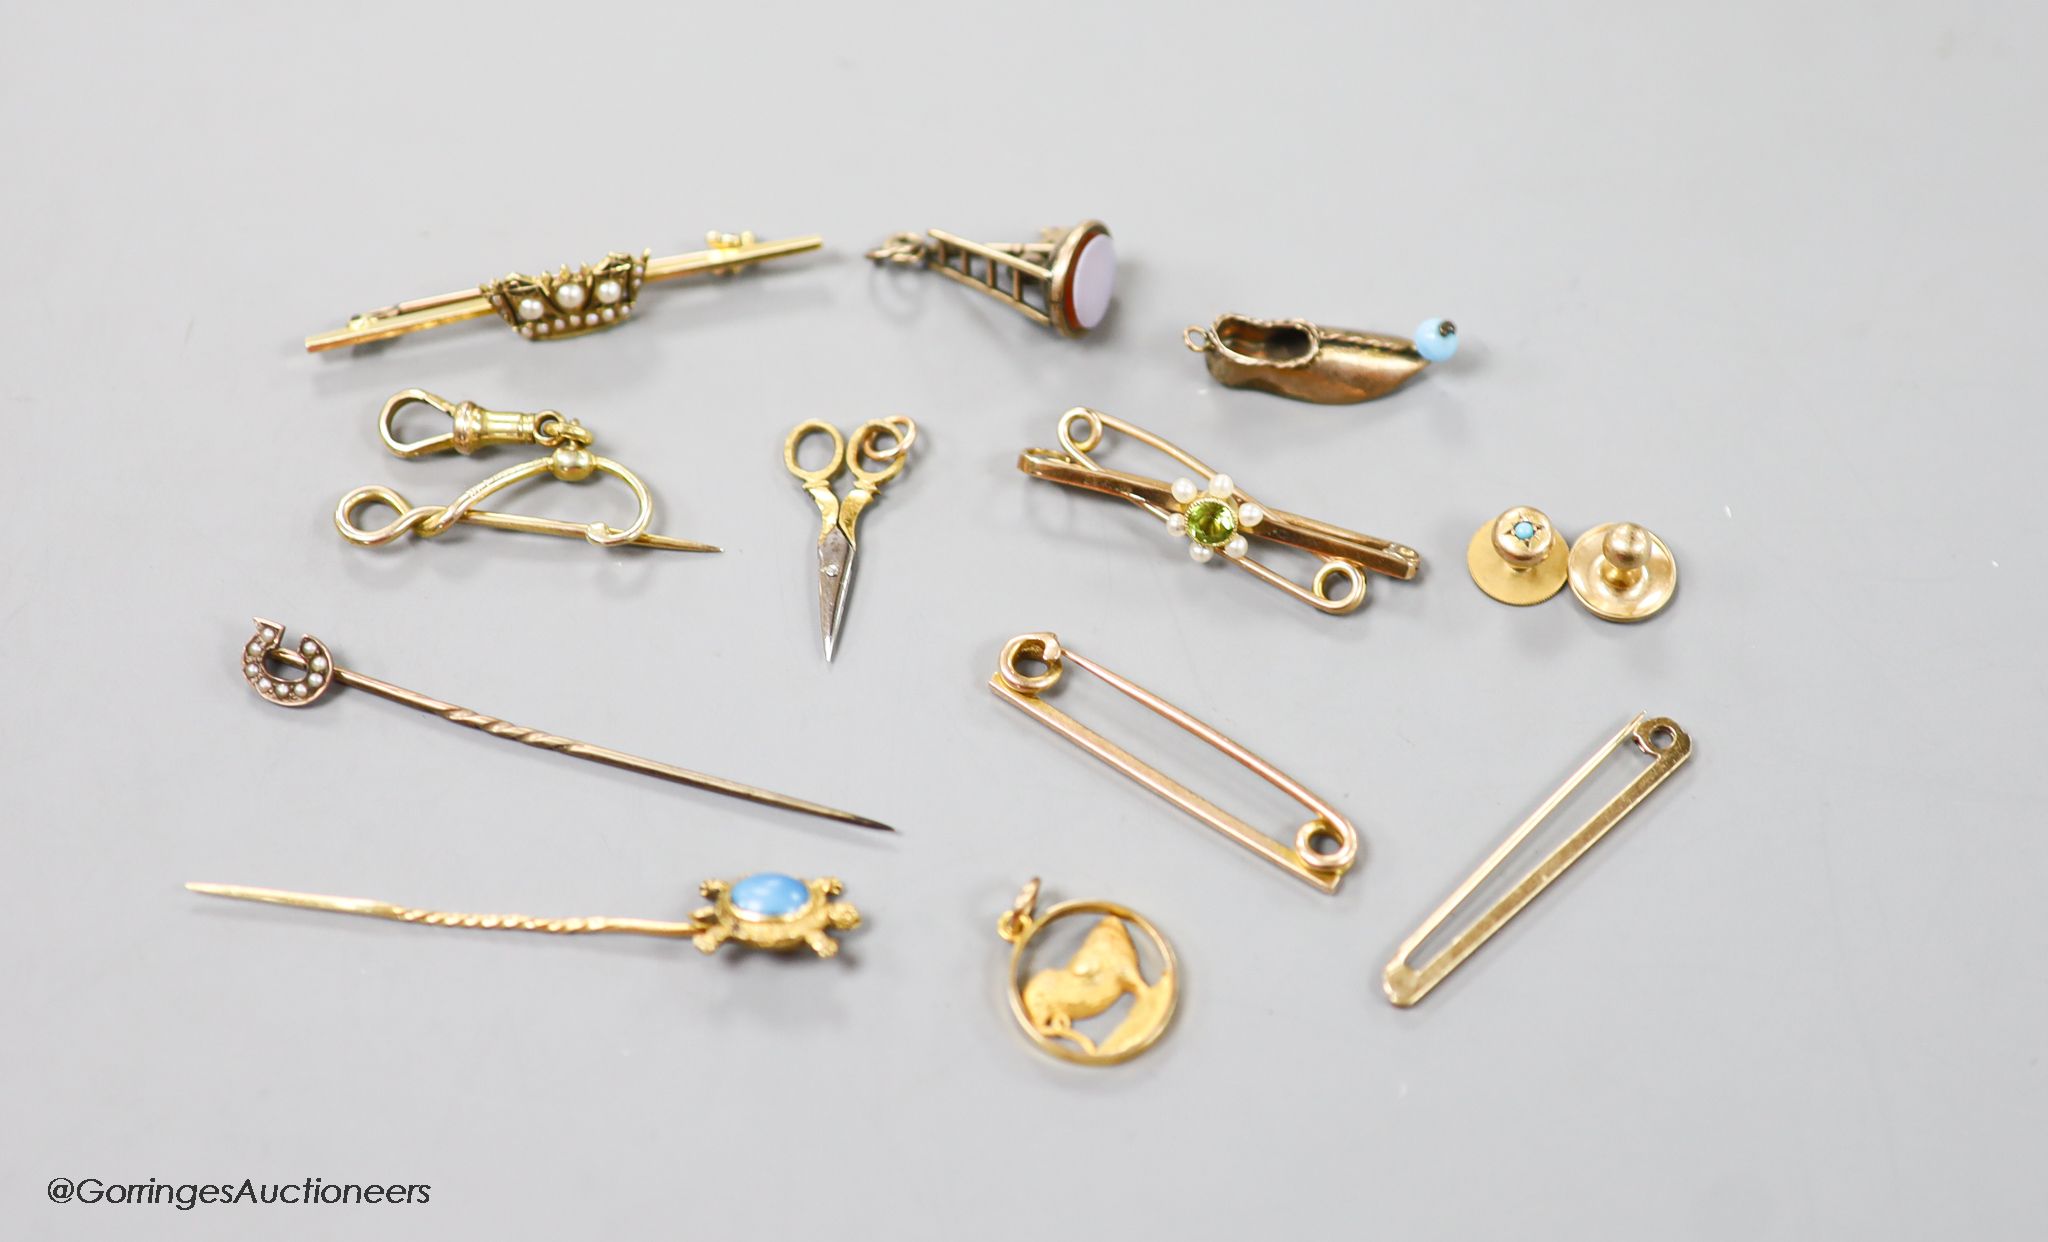 A small collection of stick pins, 'ladder and key' fob seal, bar brooches and charms etc. including 15ct and seed pearl coronet bar brooch, 50mm, gross 3.4 grams